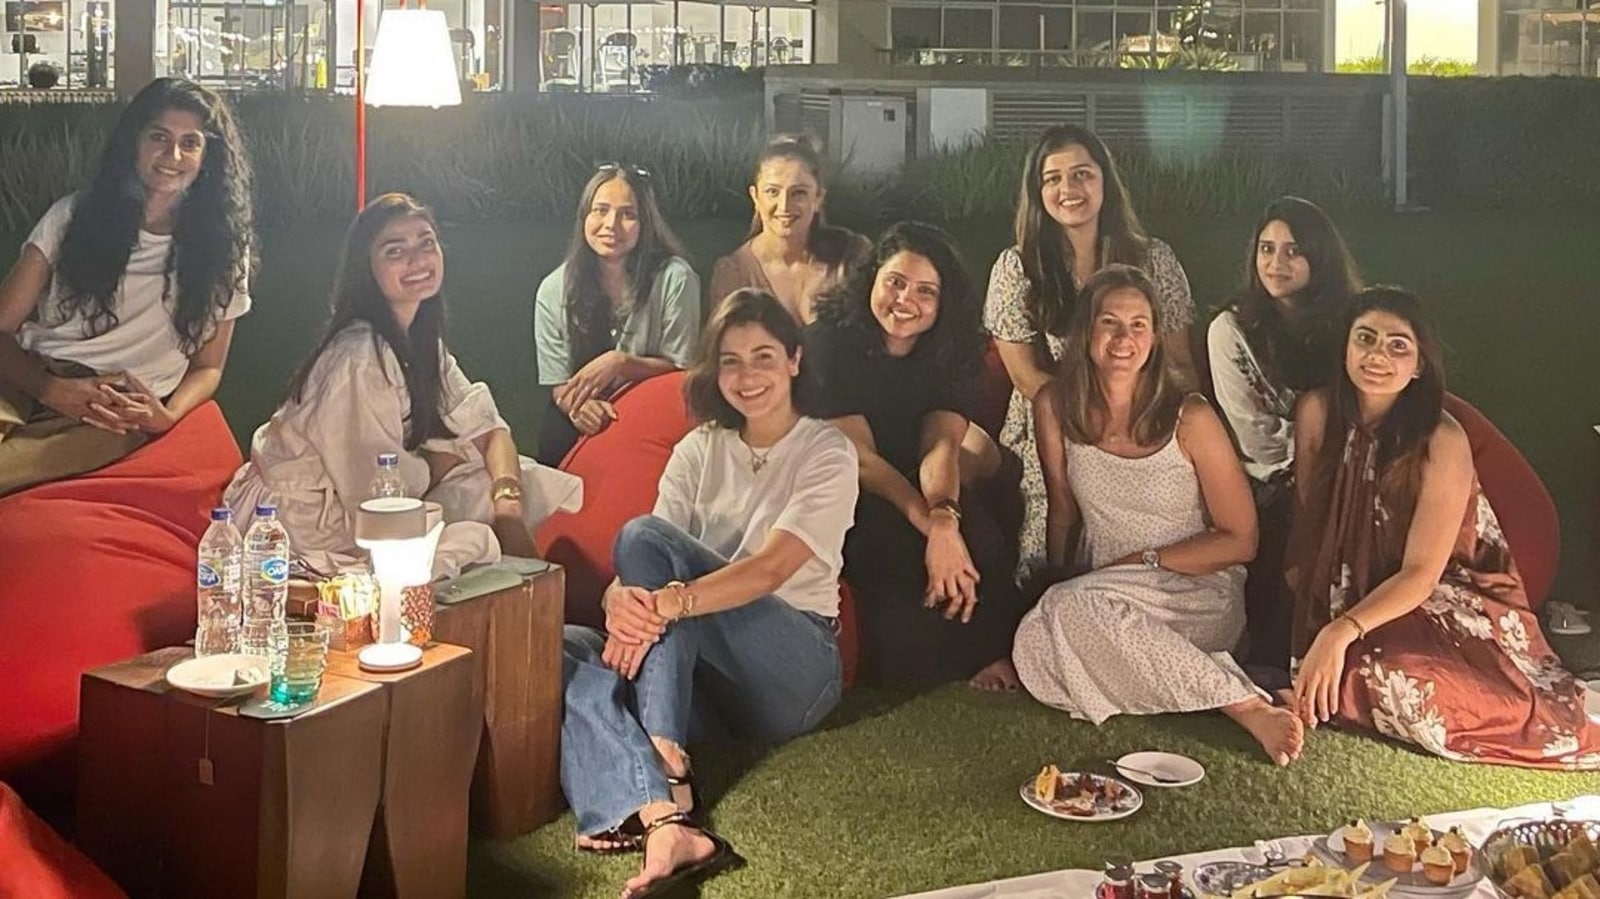 Anushka Sharma, Athiya Shetty join Rohit Sharma's wife Ritika and others  for a tea party in throwback pics | Bollywood - Hindustan Times